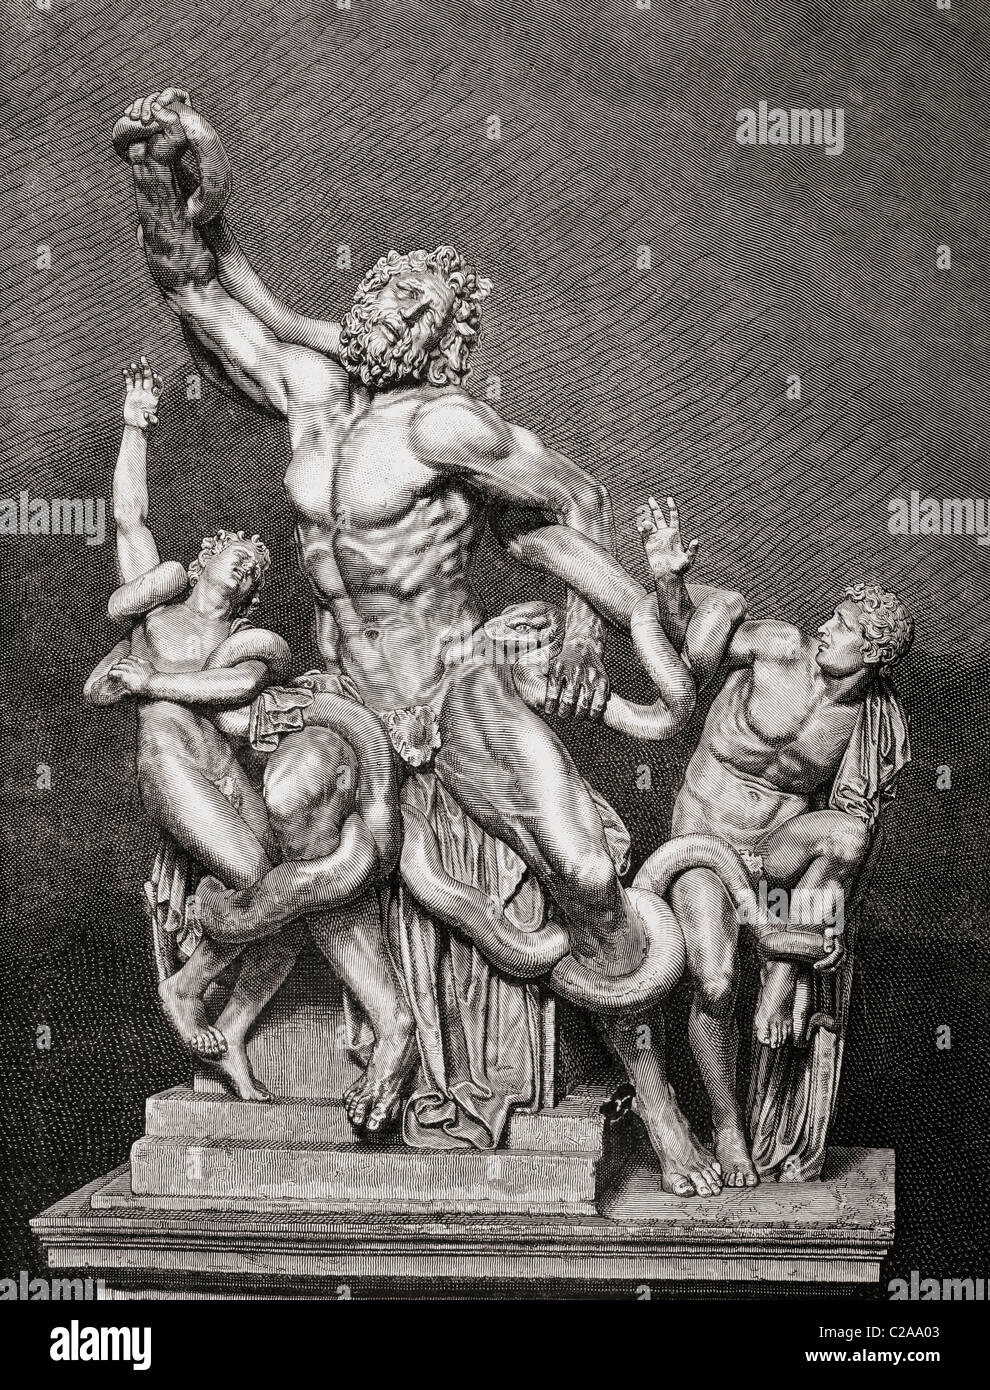 Illustration after the statue Laocoön and his Sons, attributed to sculptors Agesander, Athenodoros and Polydorus from Rhodes. Stock Photo